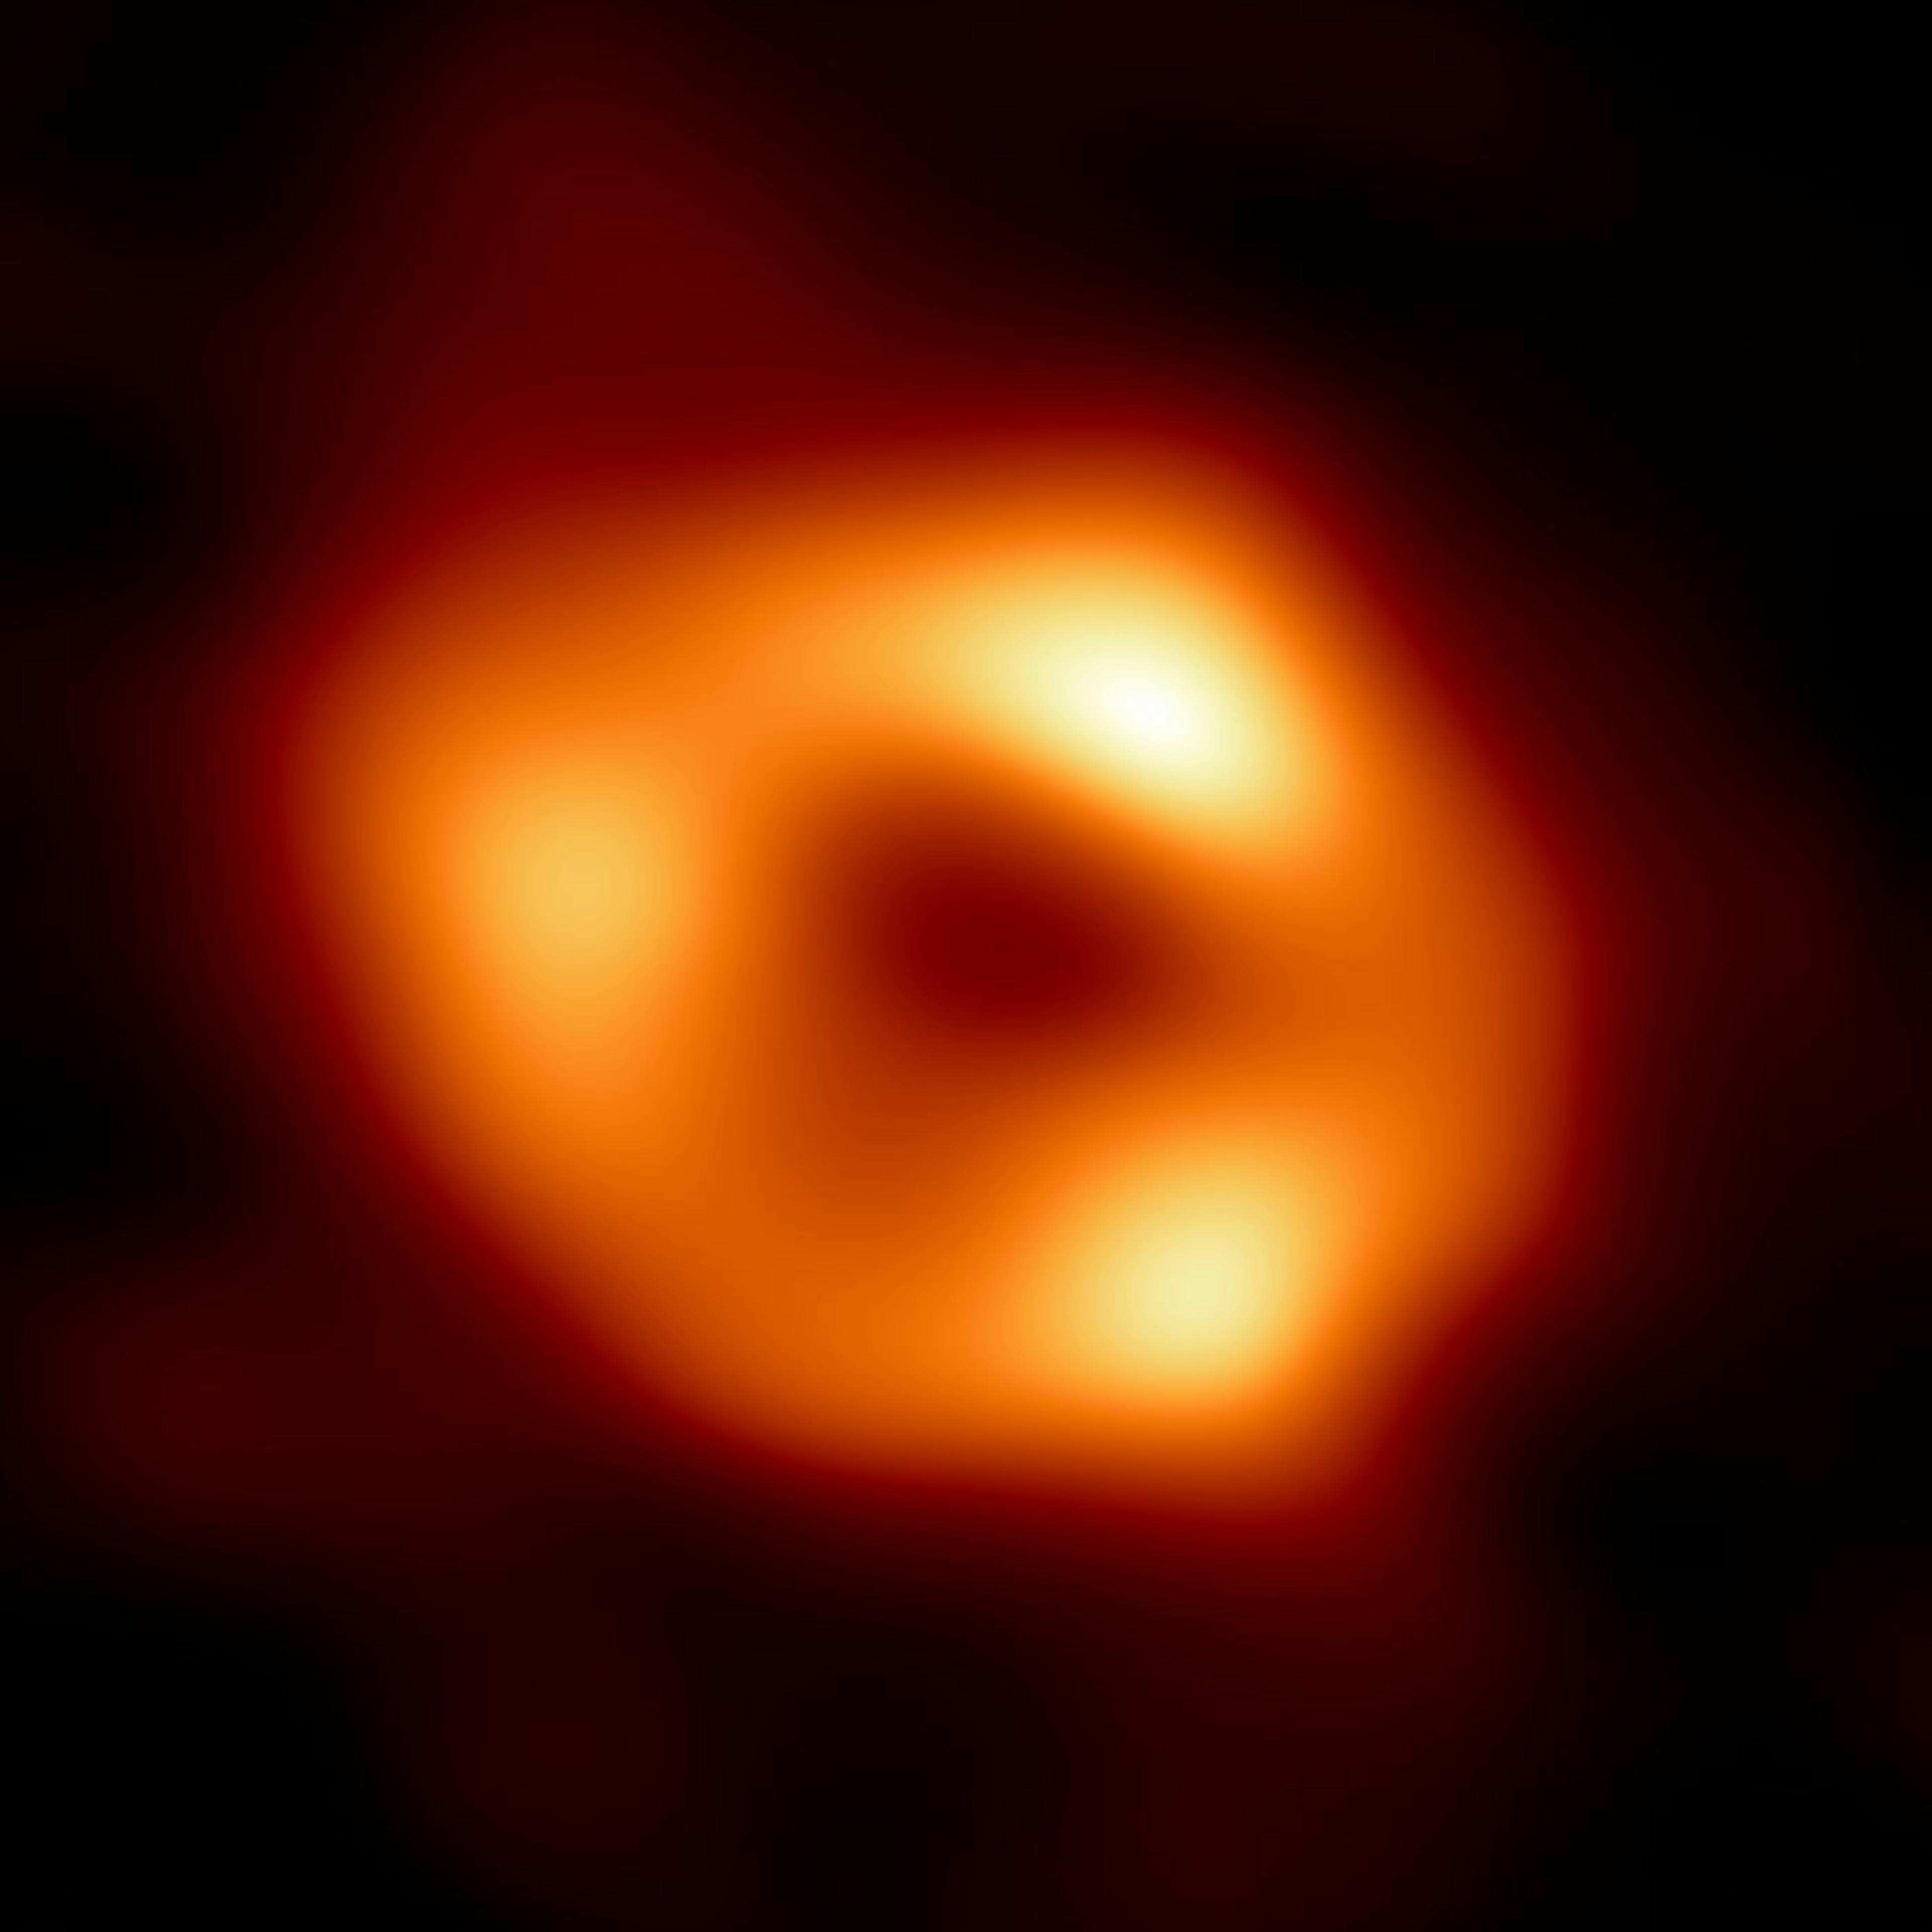 Image: First Image of the Black Hole taken by  Event Horizon Telescope (EHT) 